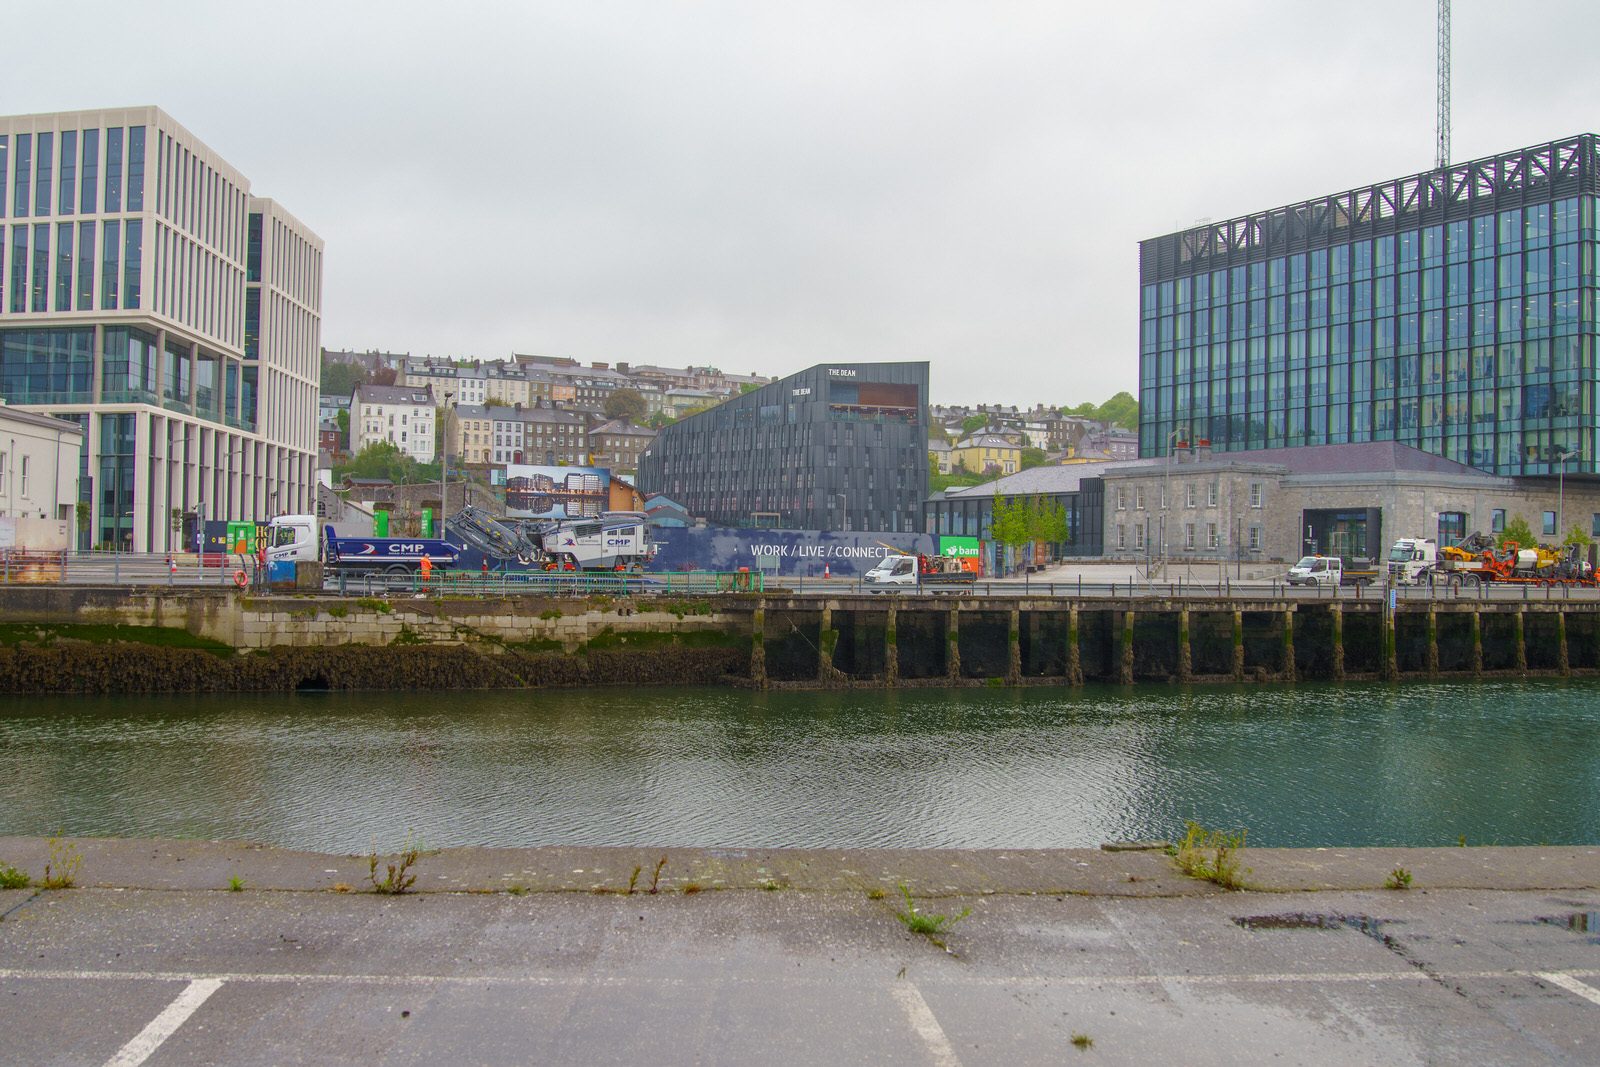 CUSTOM HOUSE HOUSE QUAY [I PHOTOGRAPHED THE AREA AND NEARBY IN JULY 2022] 017